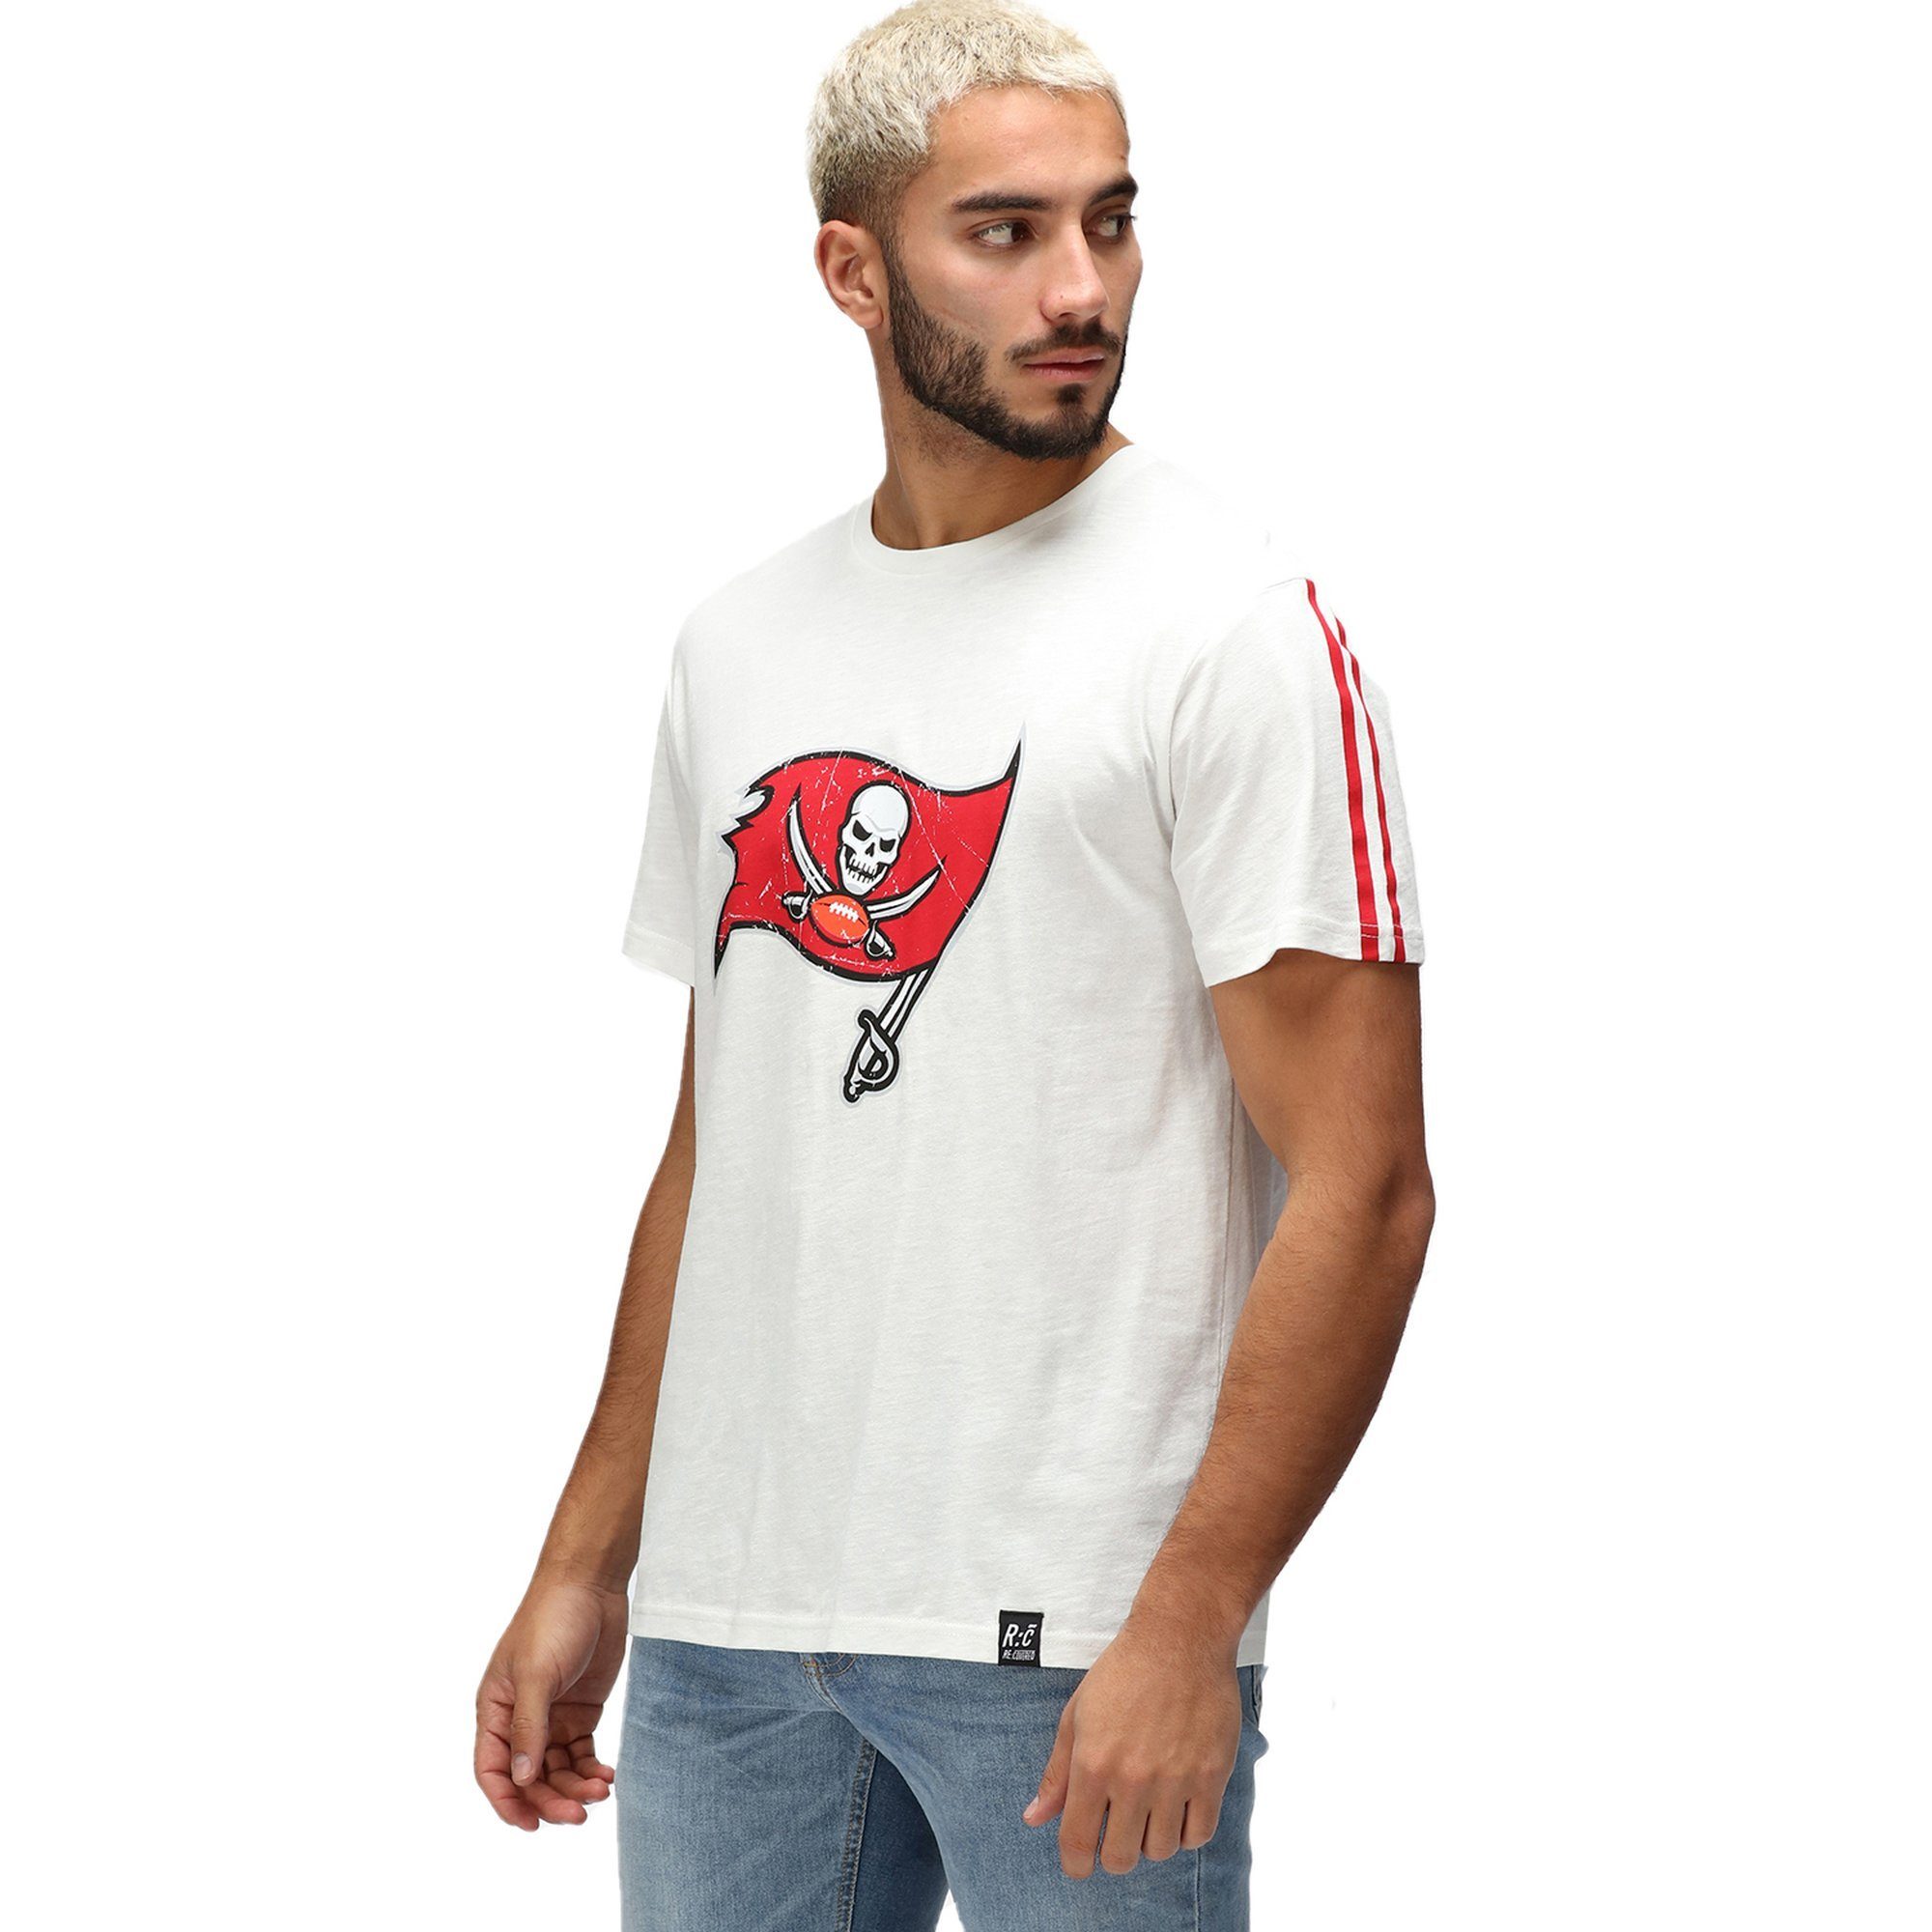 Buccaneers Print-Shirt Bay Recovered Tampa NFL ecru Re:Covered